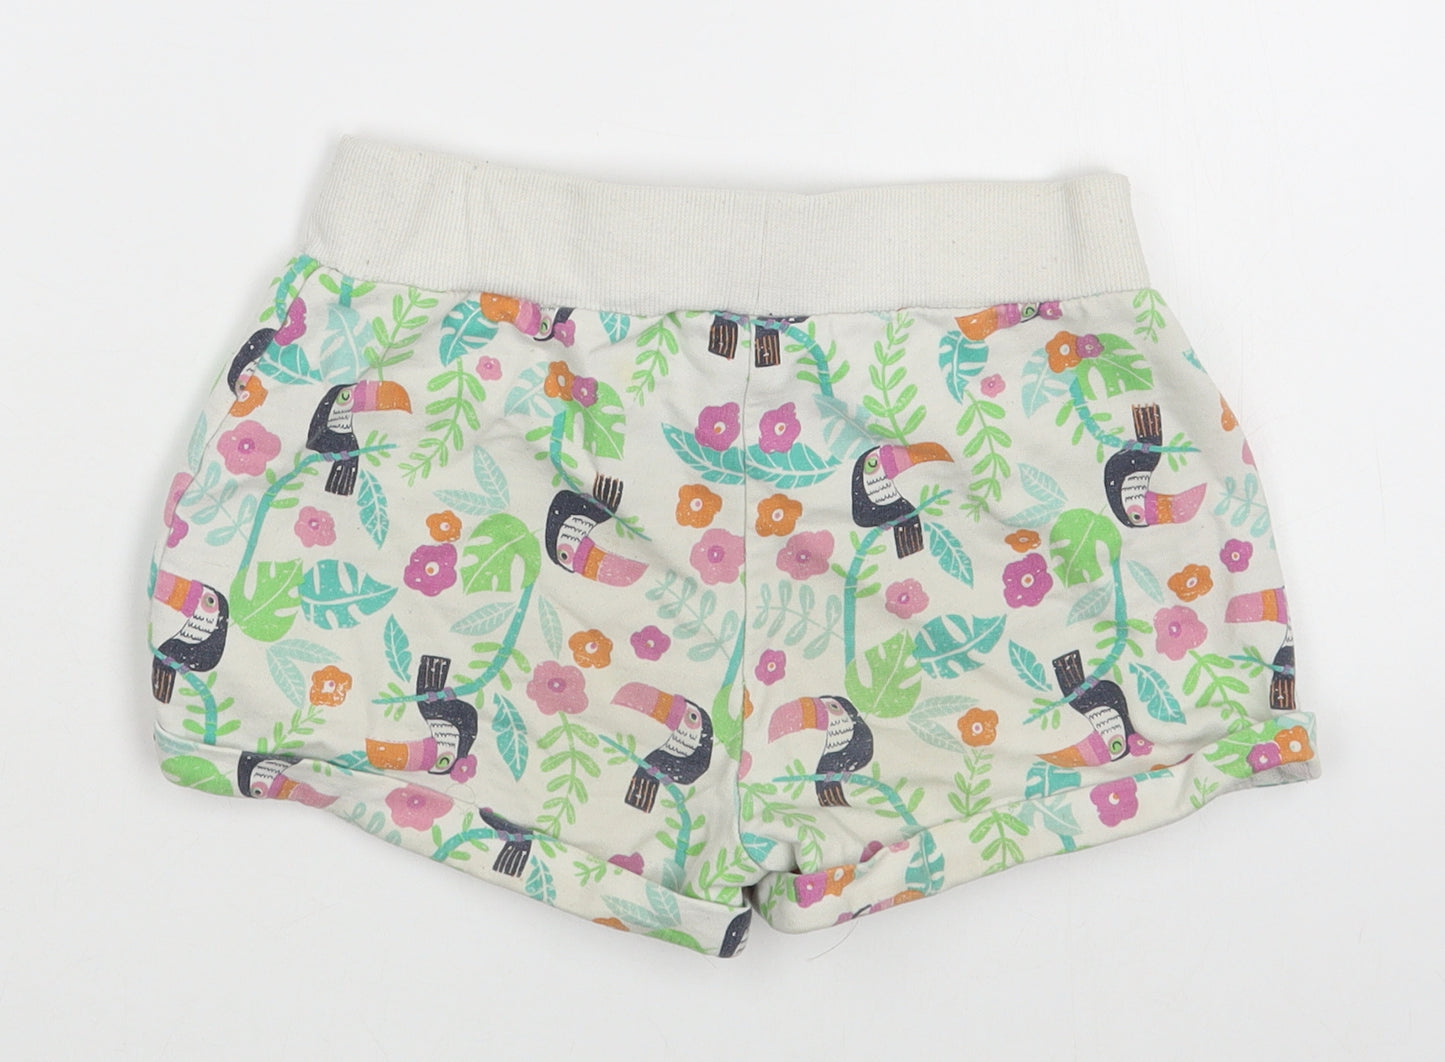 Dunnes Stores Girls Multicoloured Geometric Cotton Sweat Shorts Size 8 Years  Regular Tie